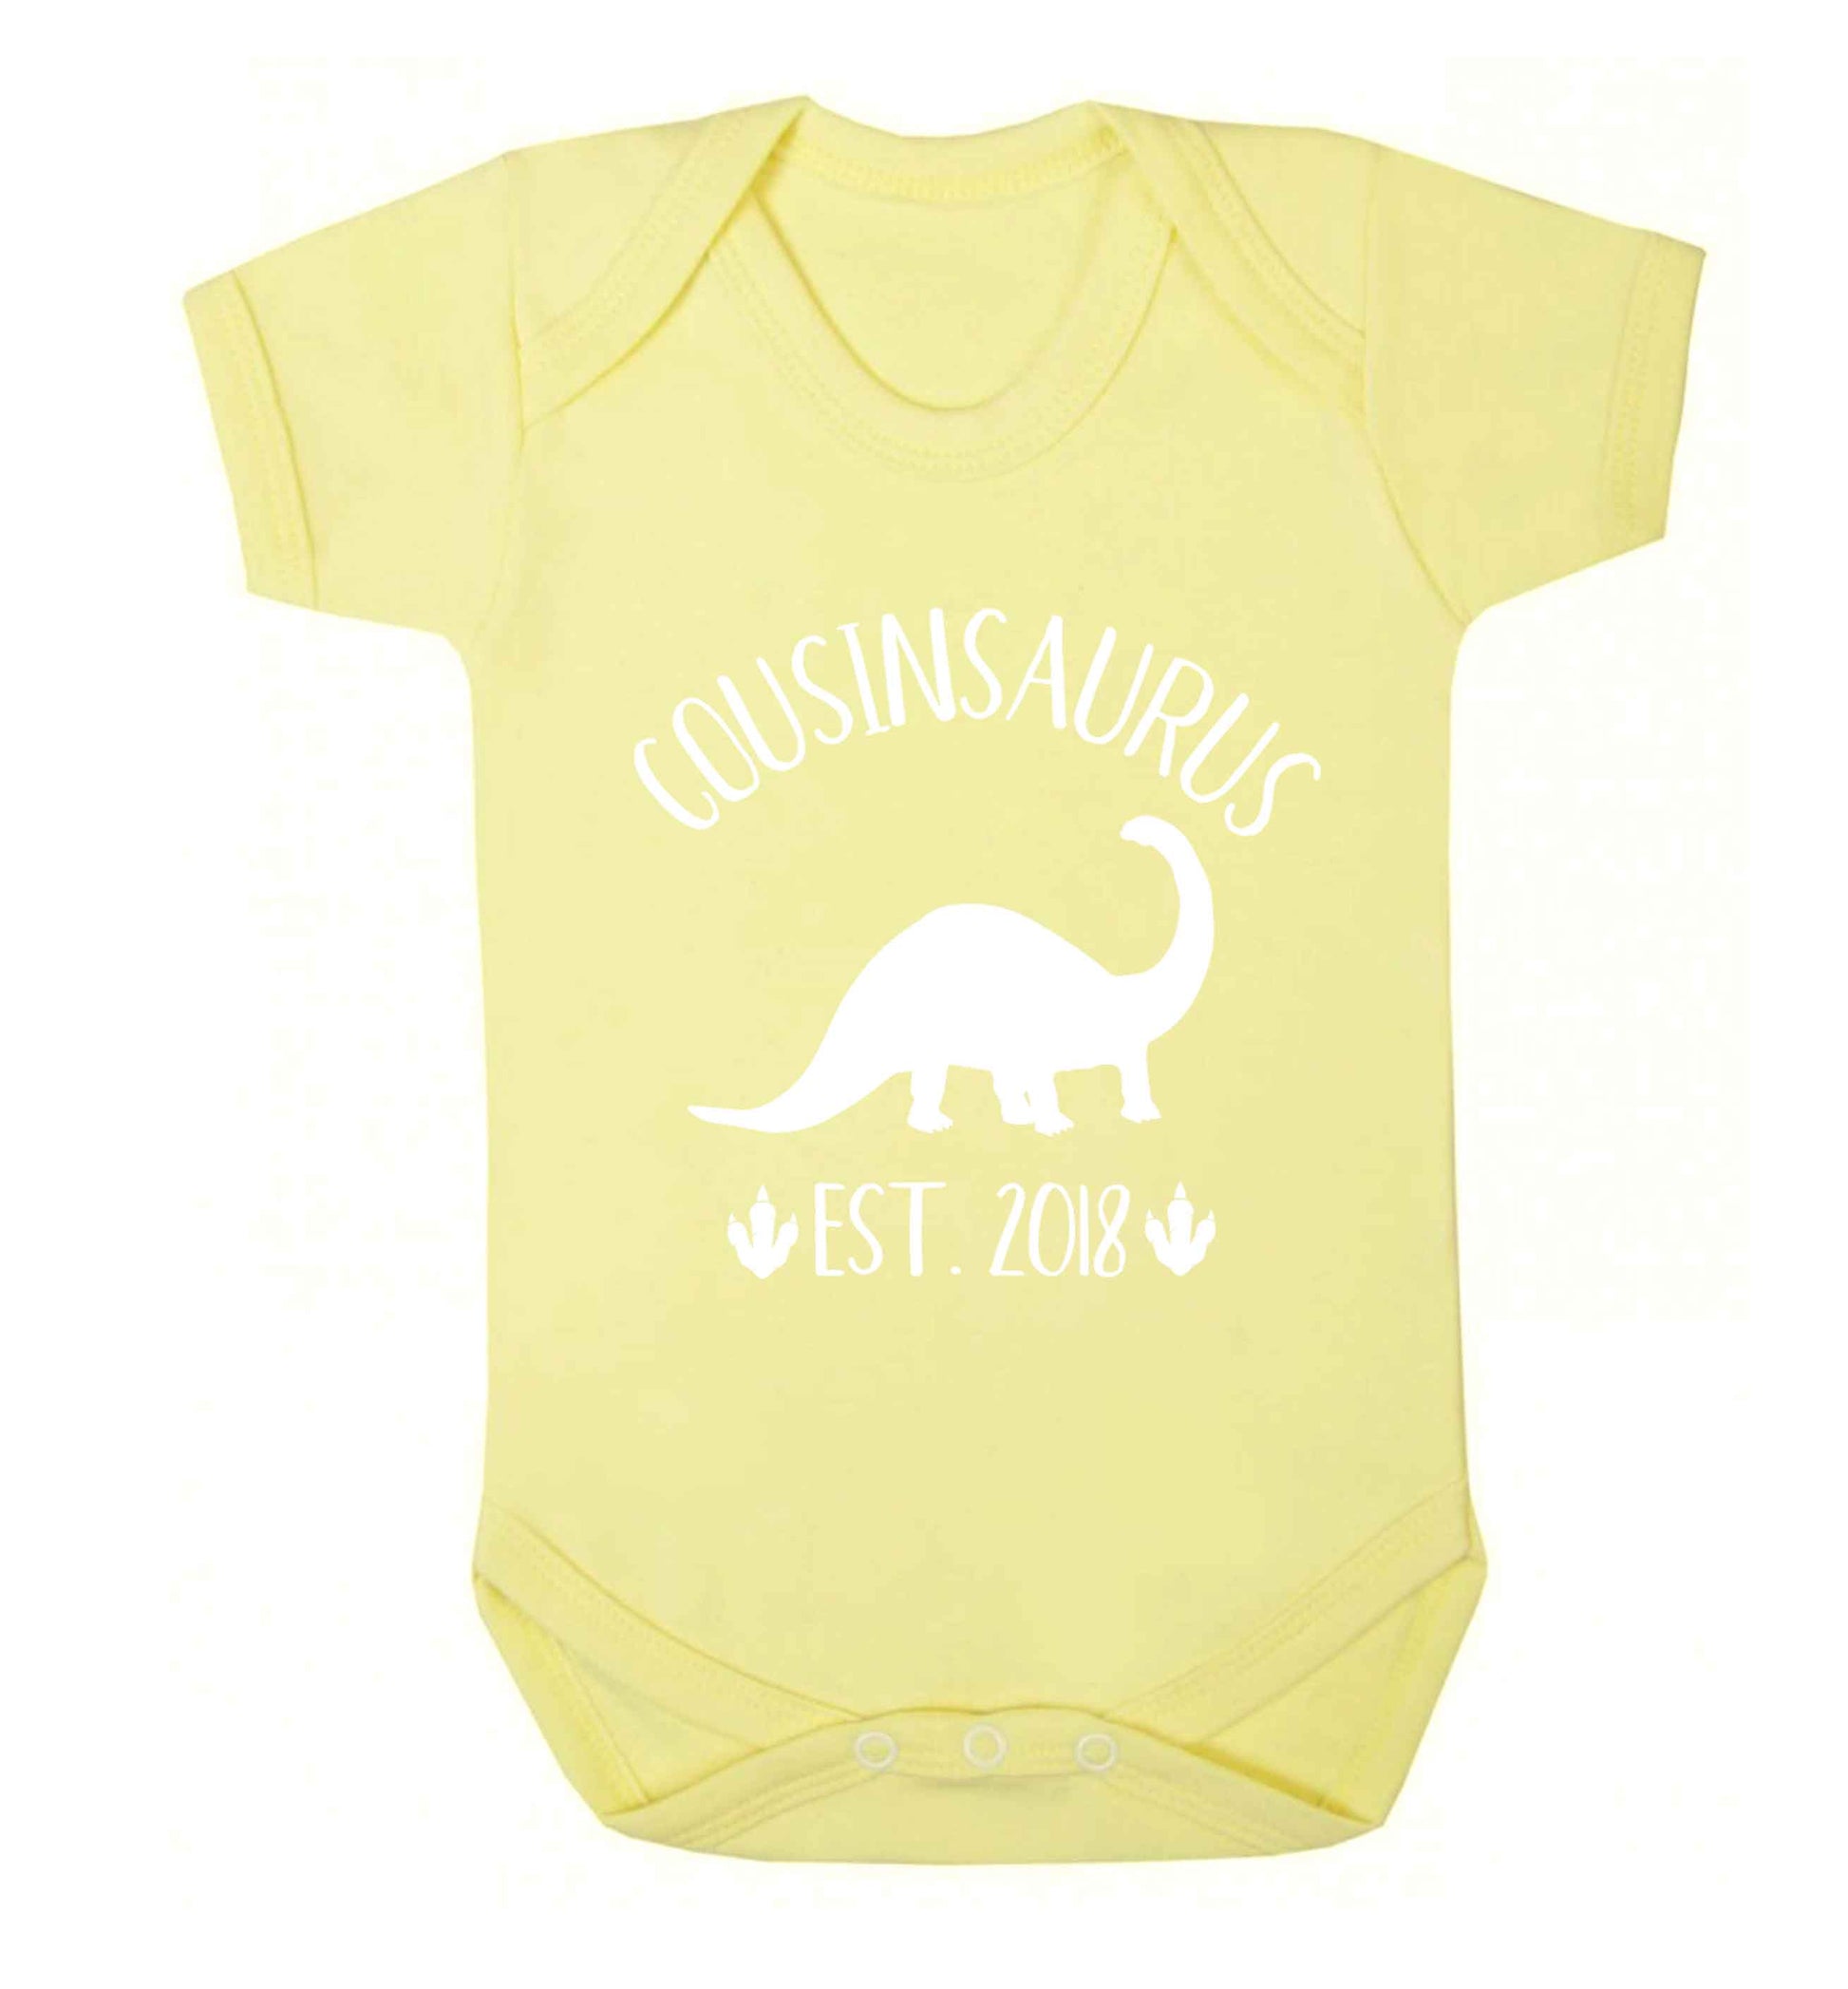 Personalised cousinsaurus since (custom date) Baby Vest pale yellow 18-24 months